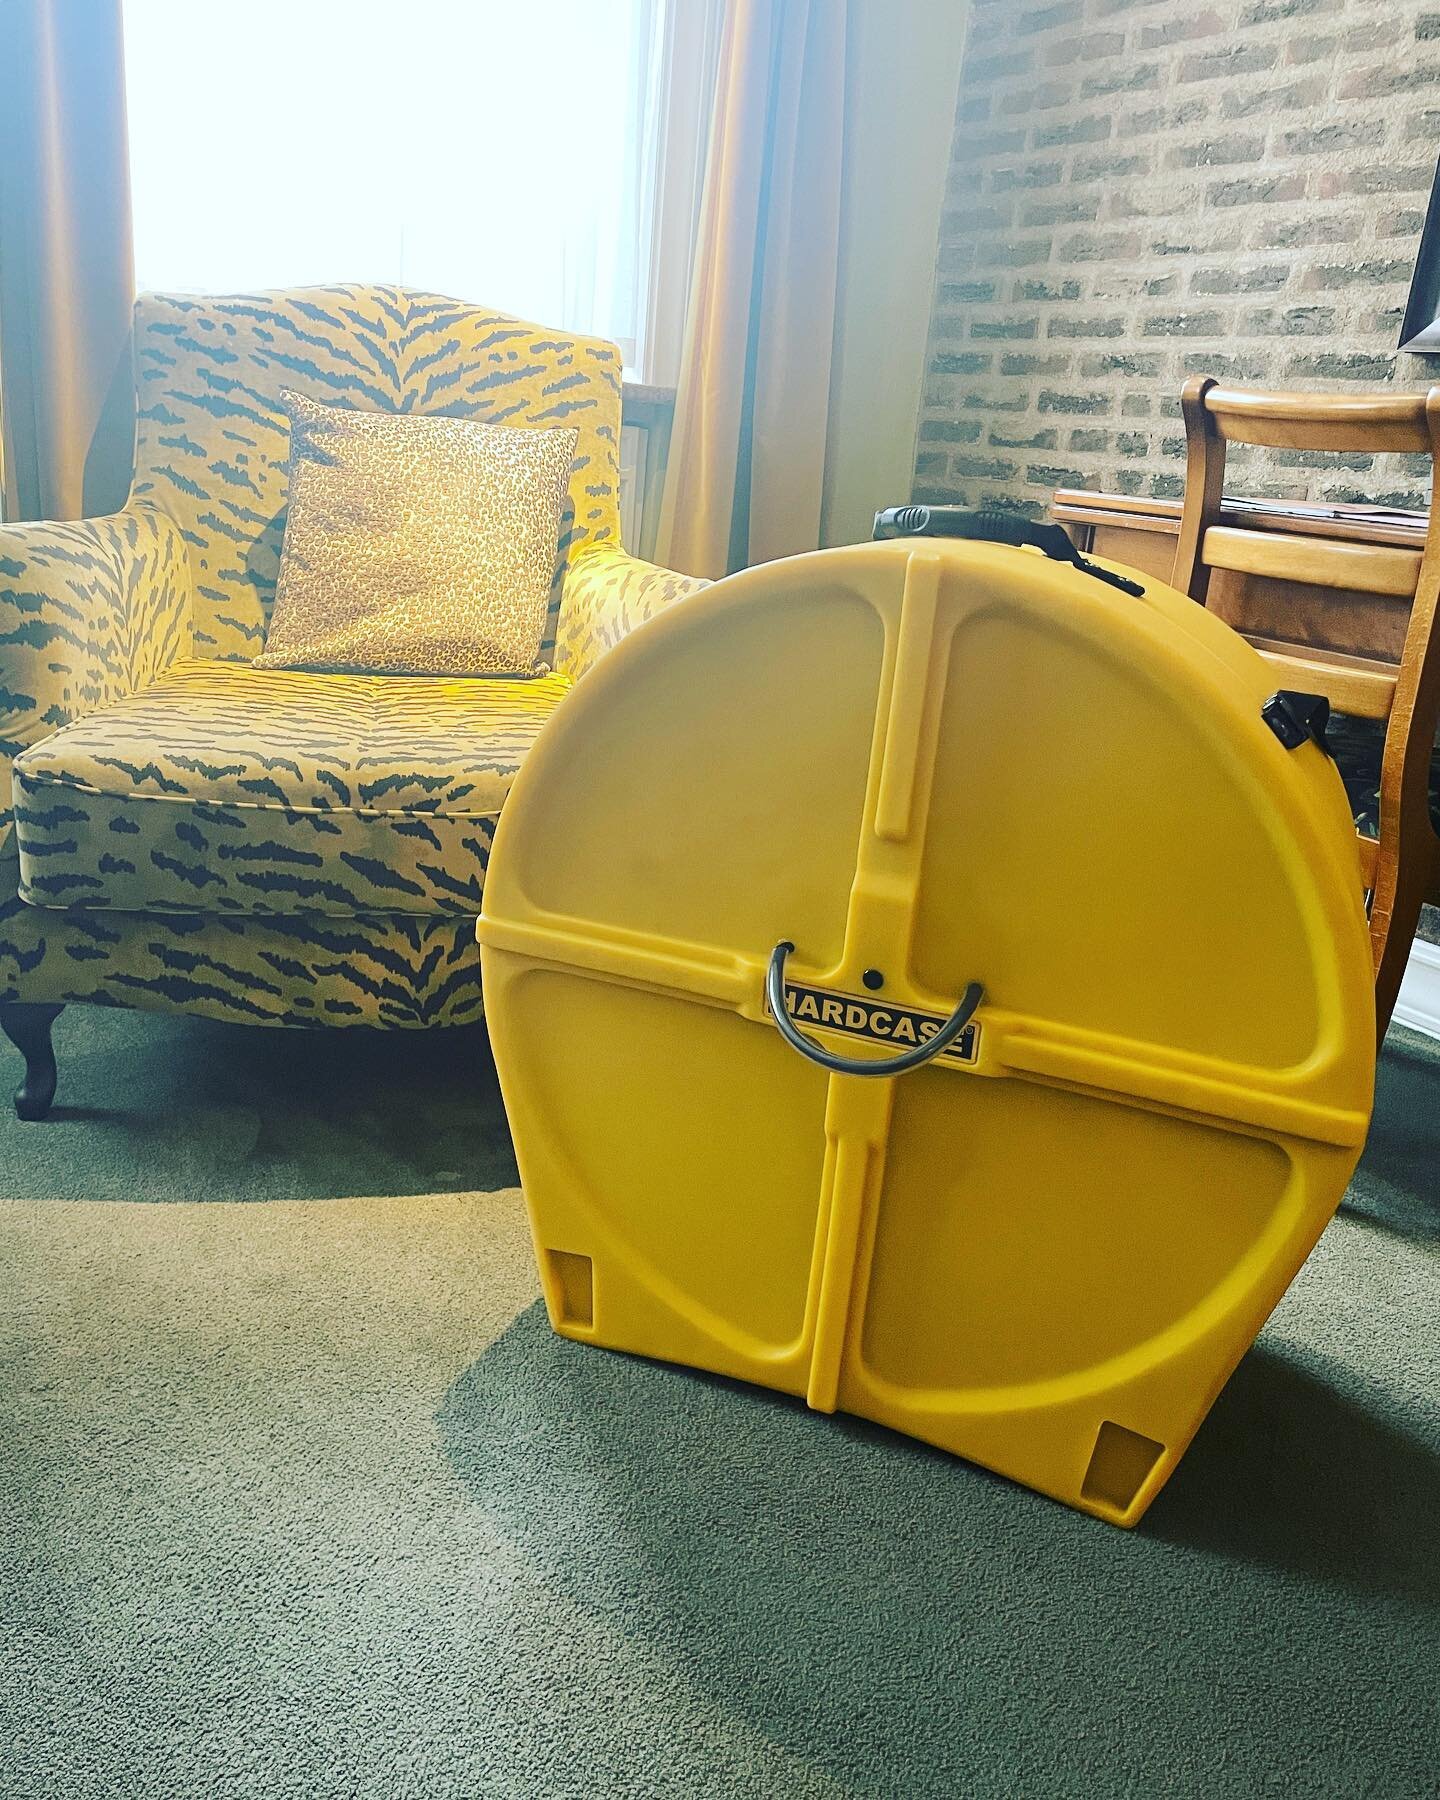 Thanks to @hardcase_drum_cases for a snazzy new travel case (in Yellow of course 🔆). Where to next?